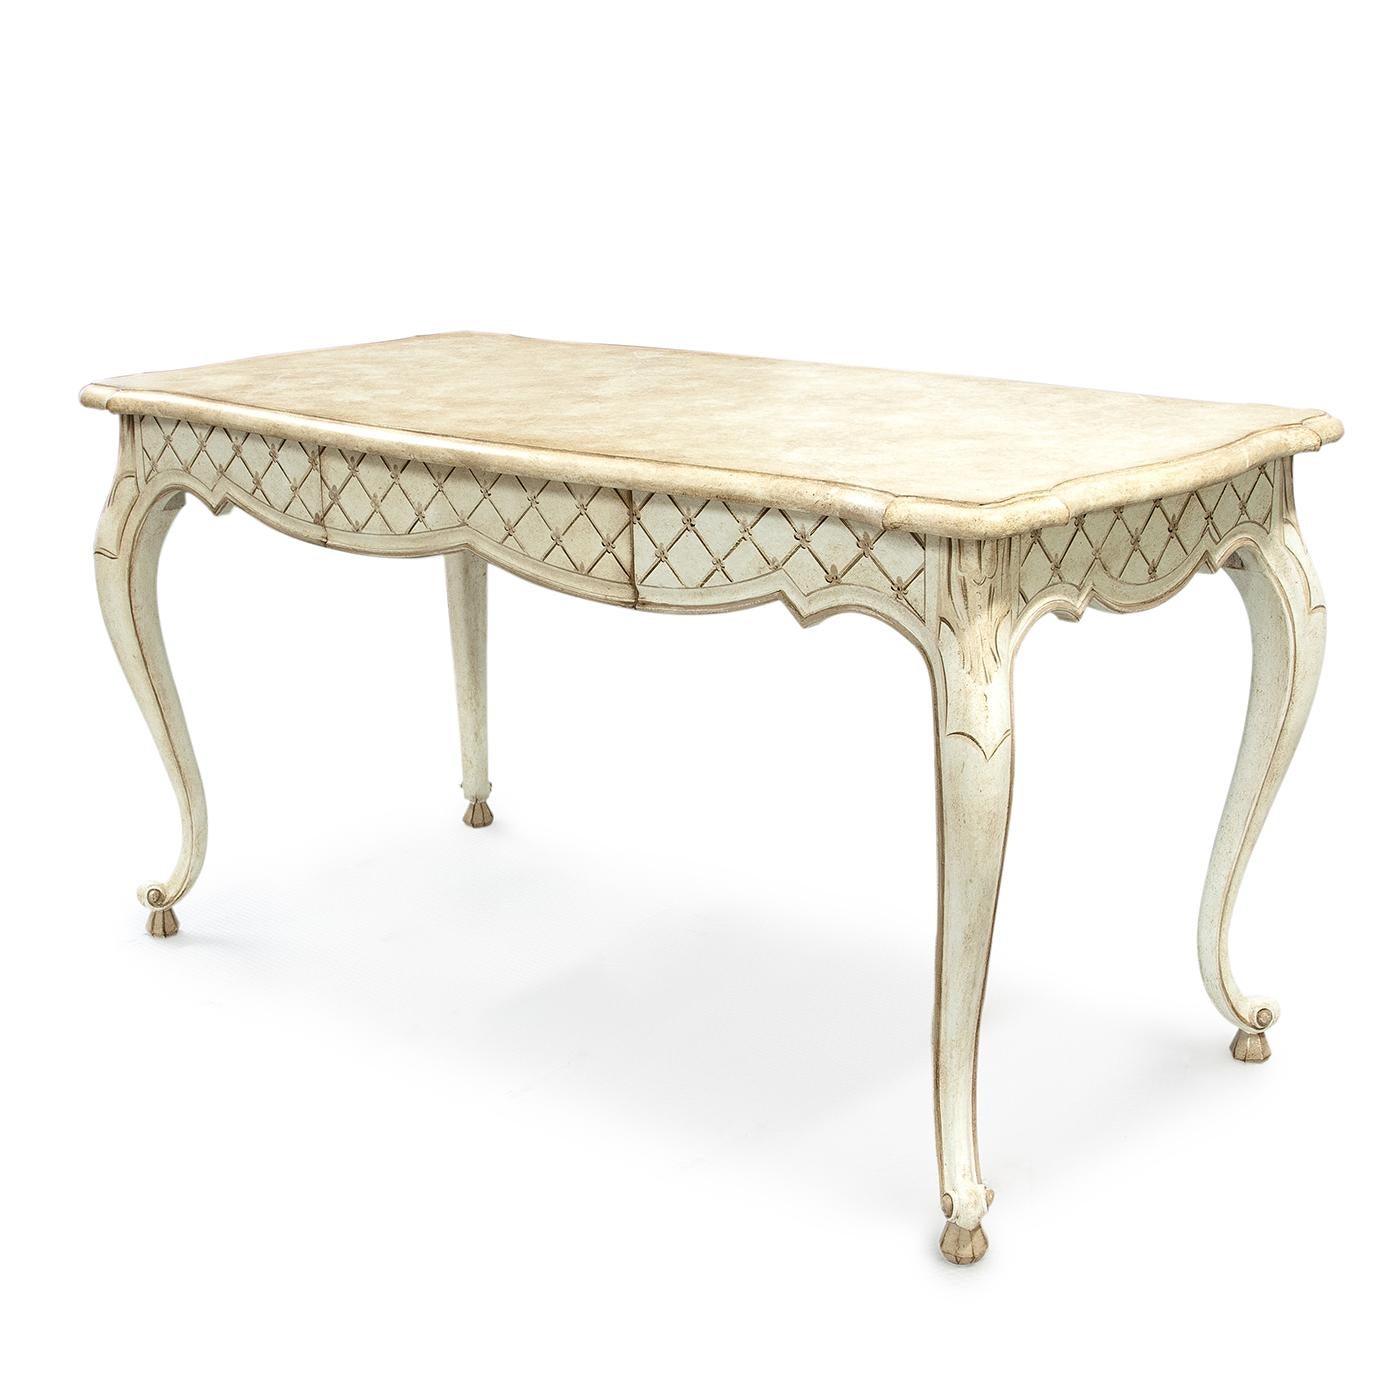 Italian Stra Table with drawer and criss-cross design For Sale